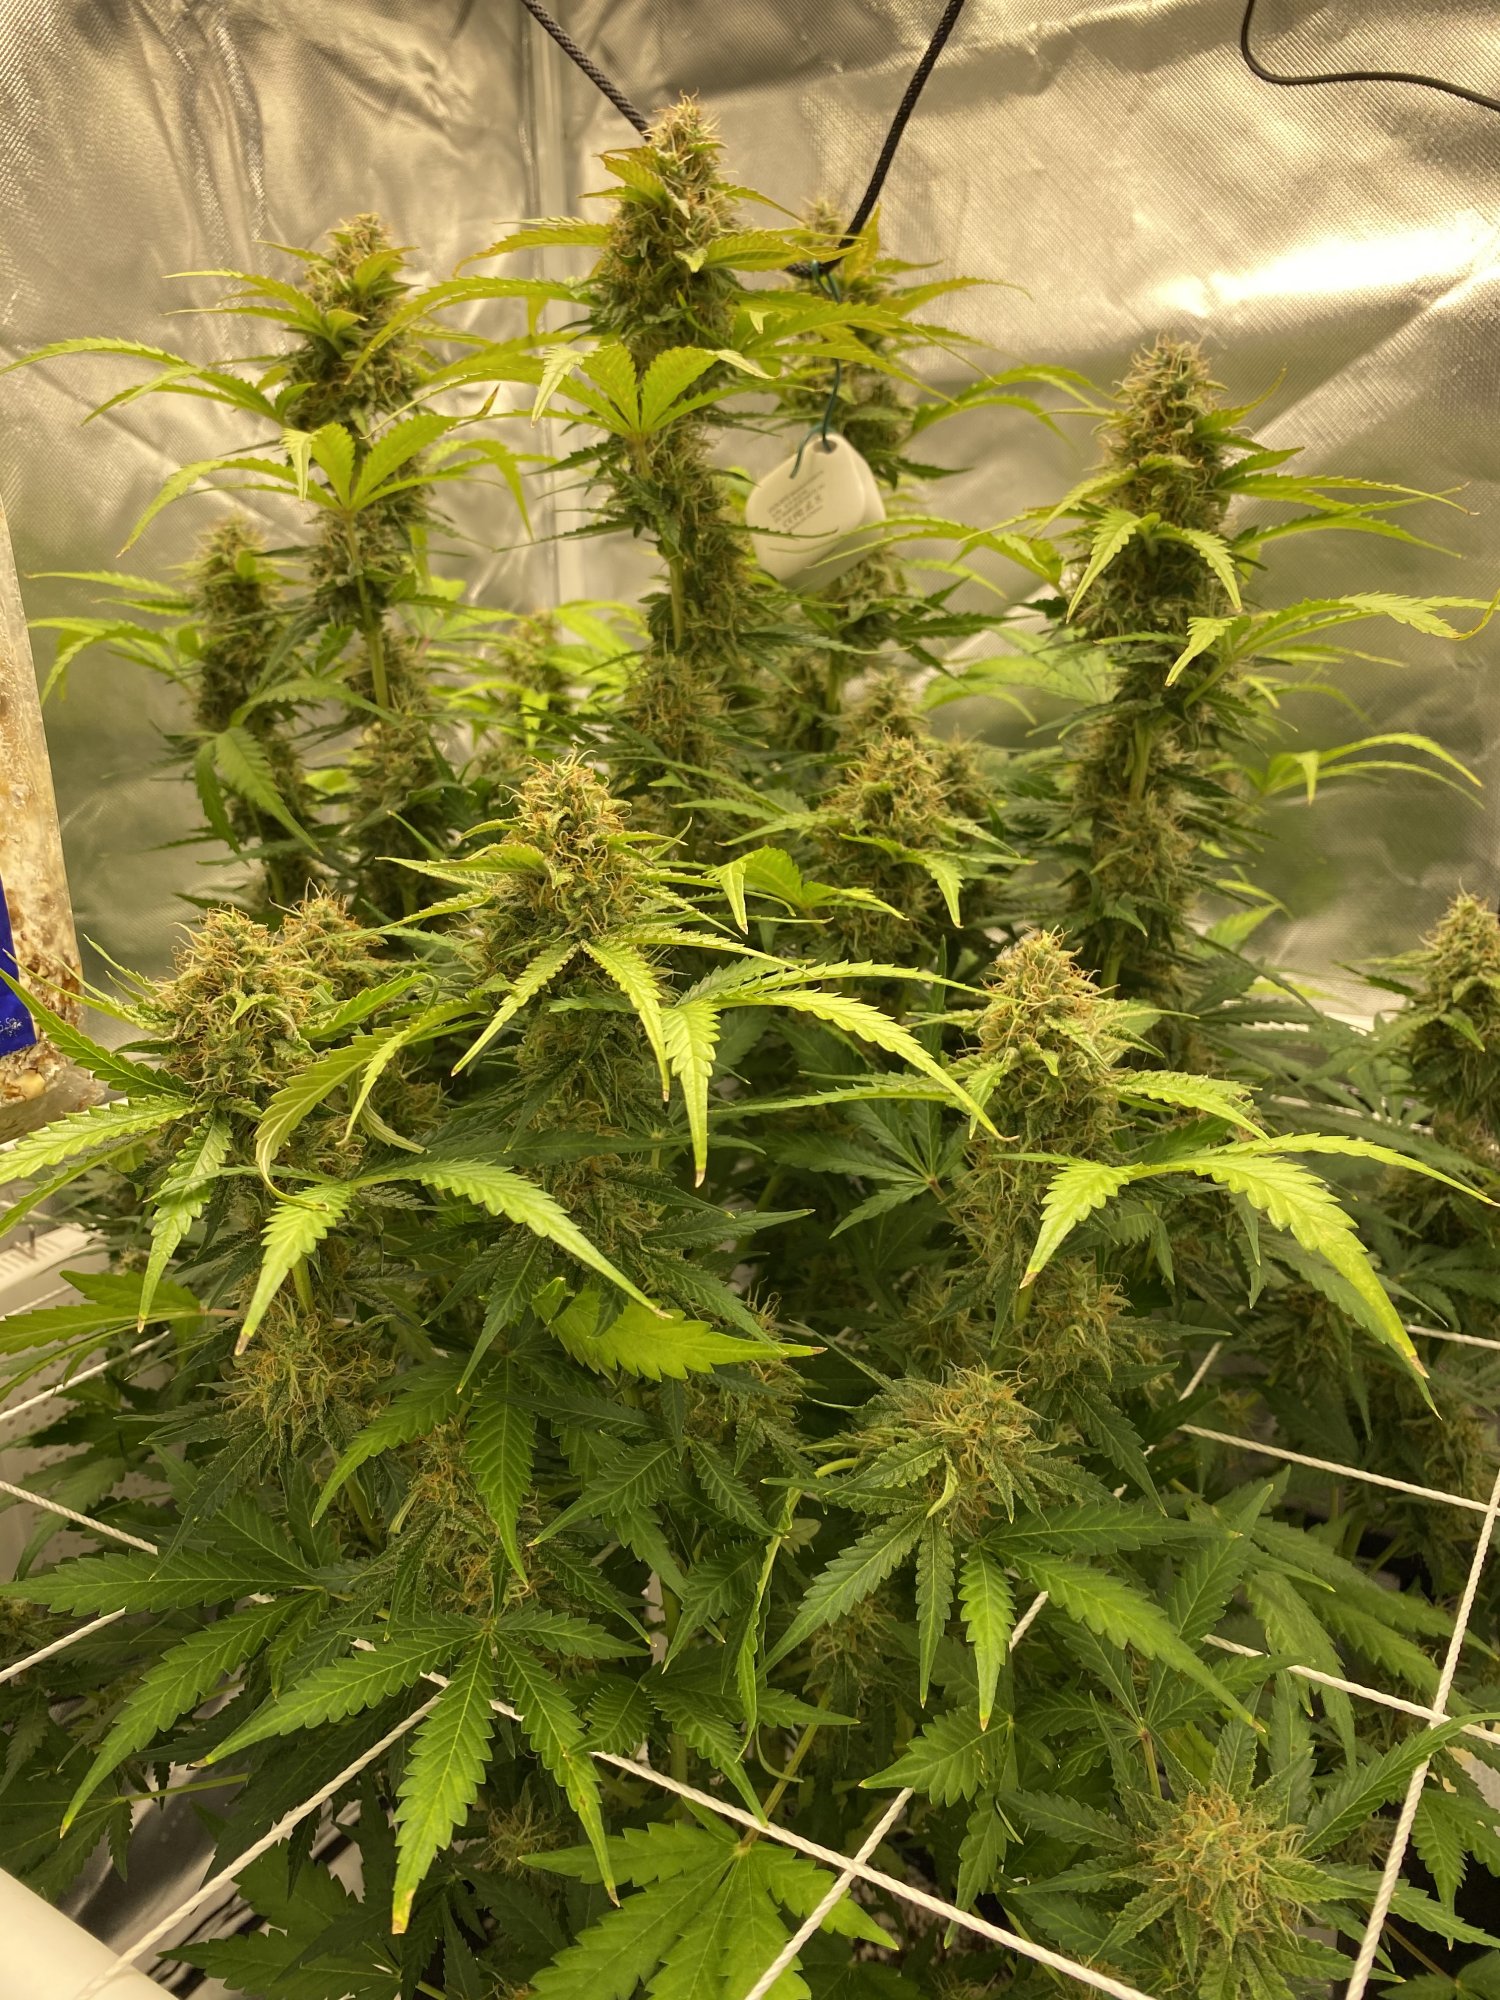 Week 5 flower a hint of sewergarbage when i open tent